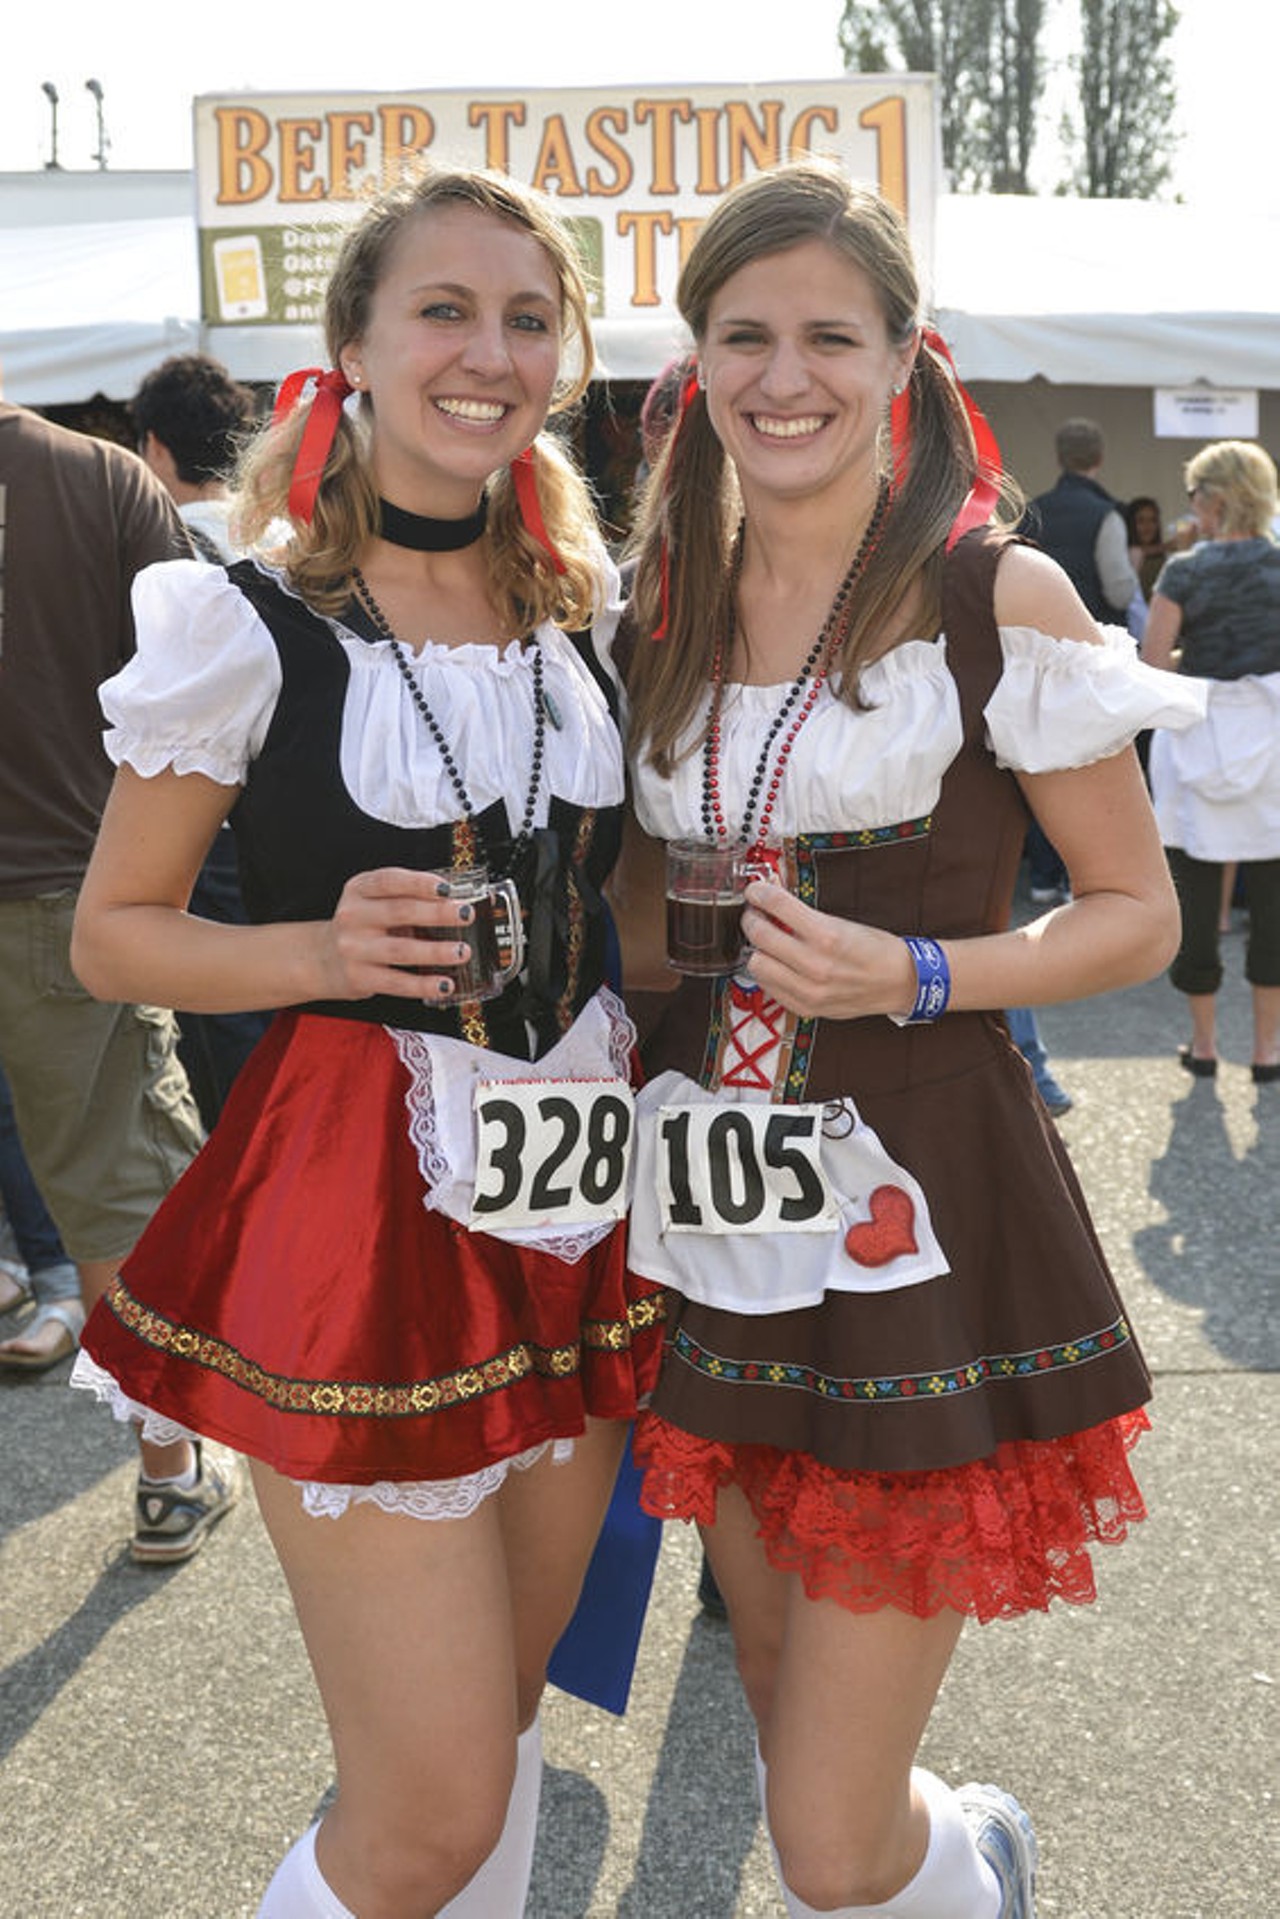 From the Fremont Oktoberfest 2012 gallery, published by the Seattle Weekly.